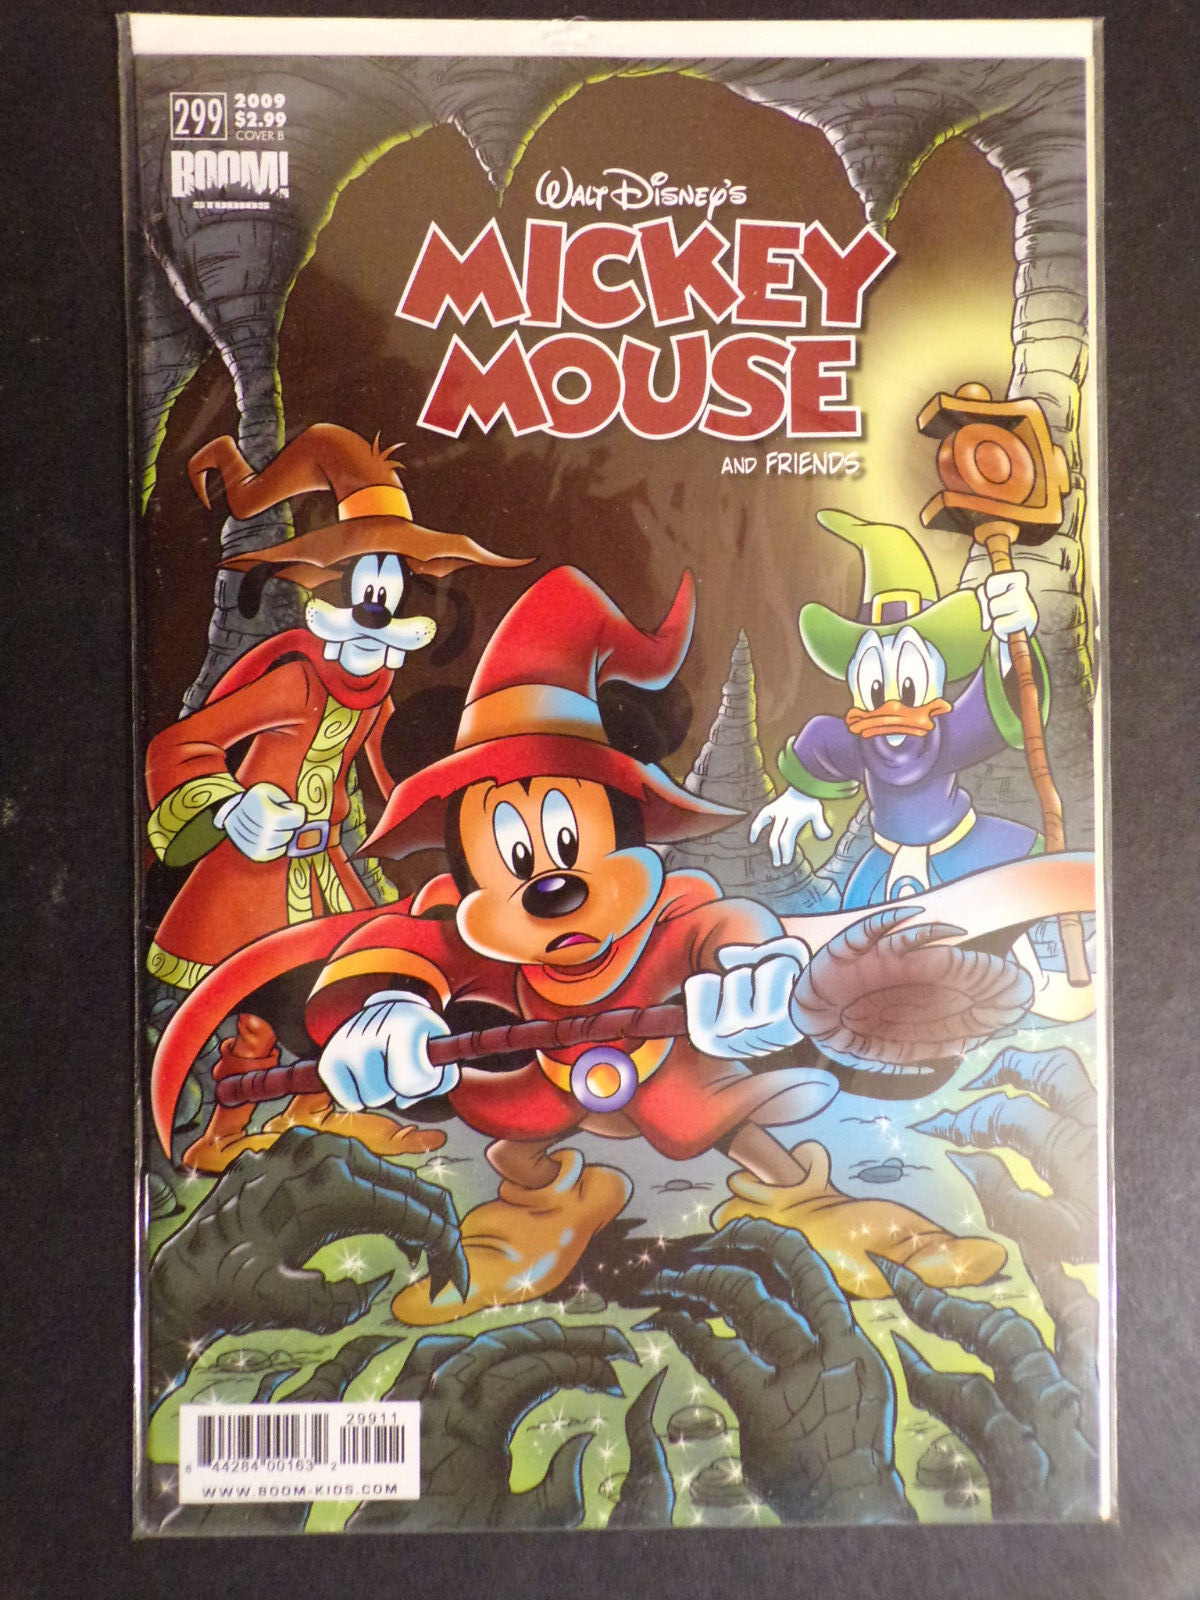 Mickey Mouse and Friends #299 (Gemstone 2009) J12